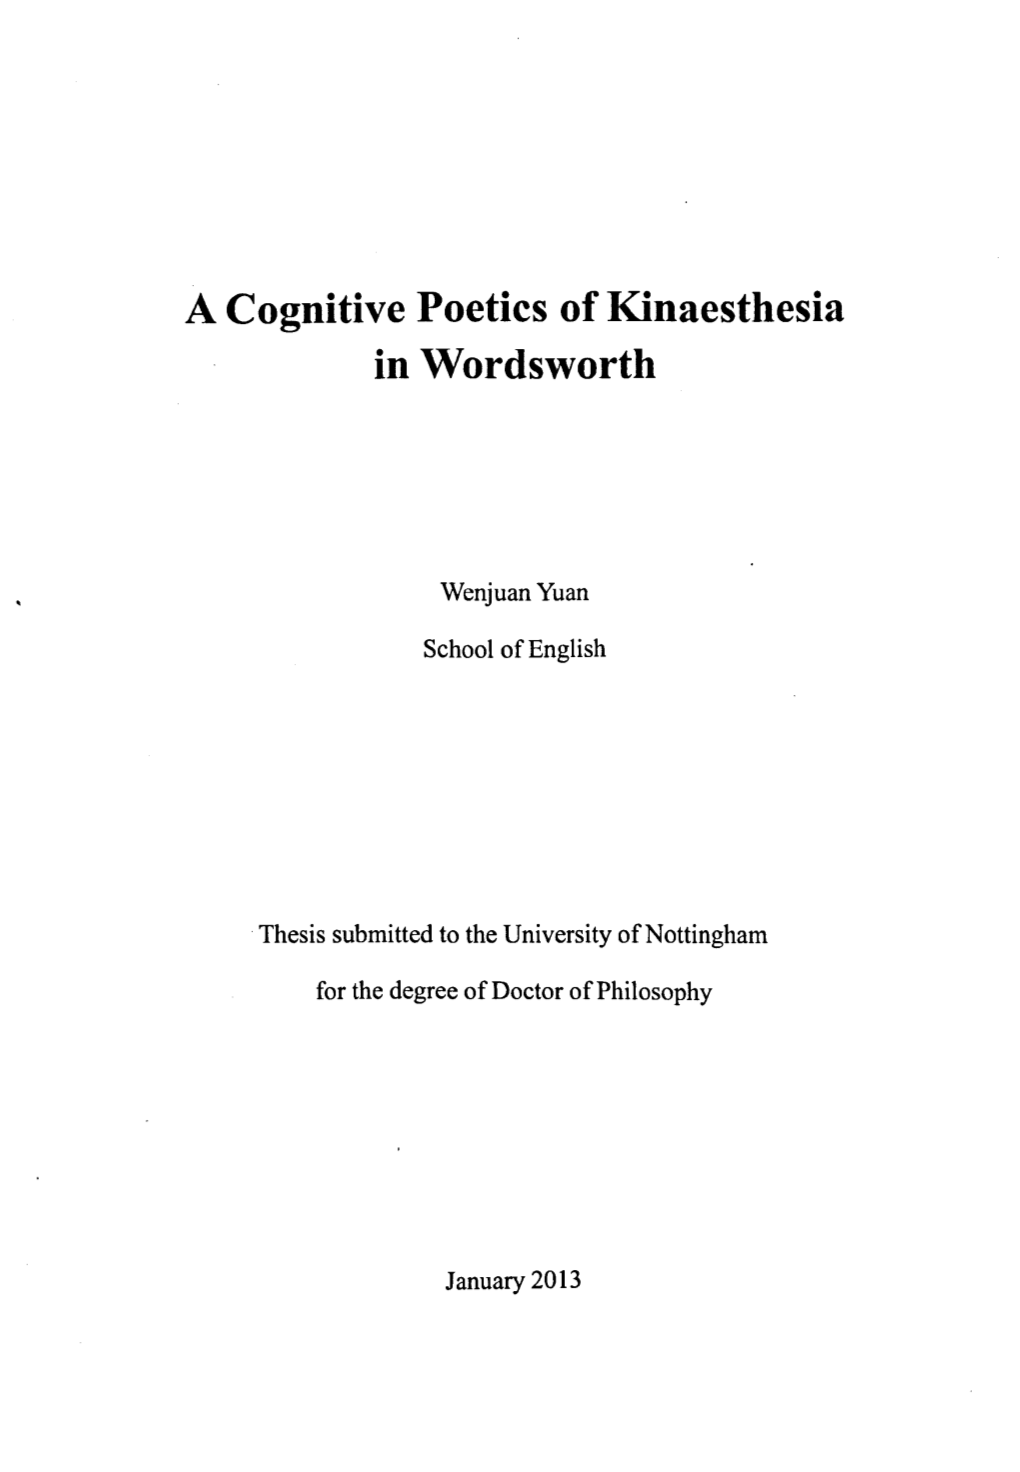 A Cognitive Poetics of Kinaesthesia in Wordsworth